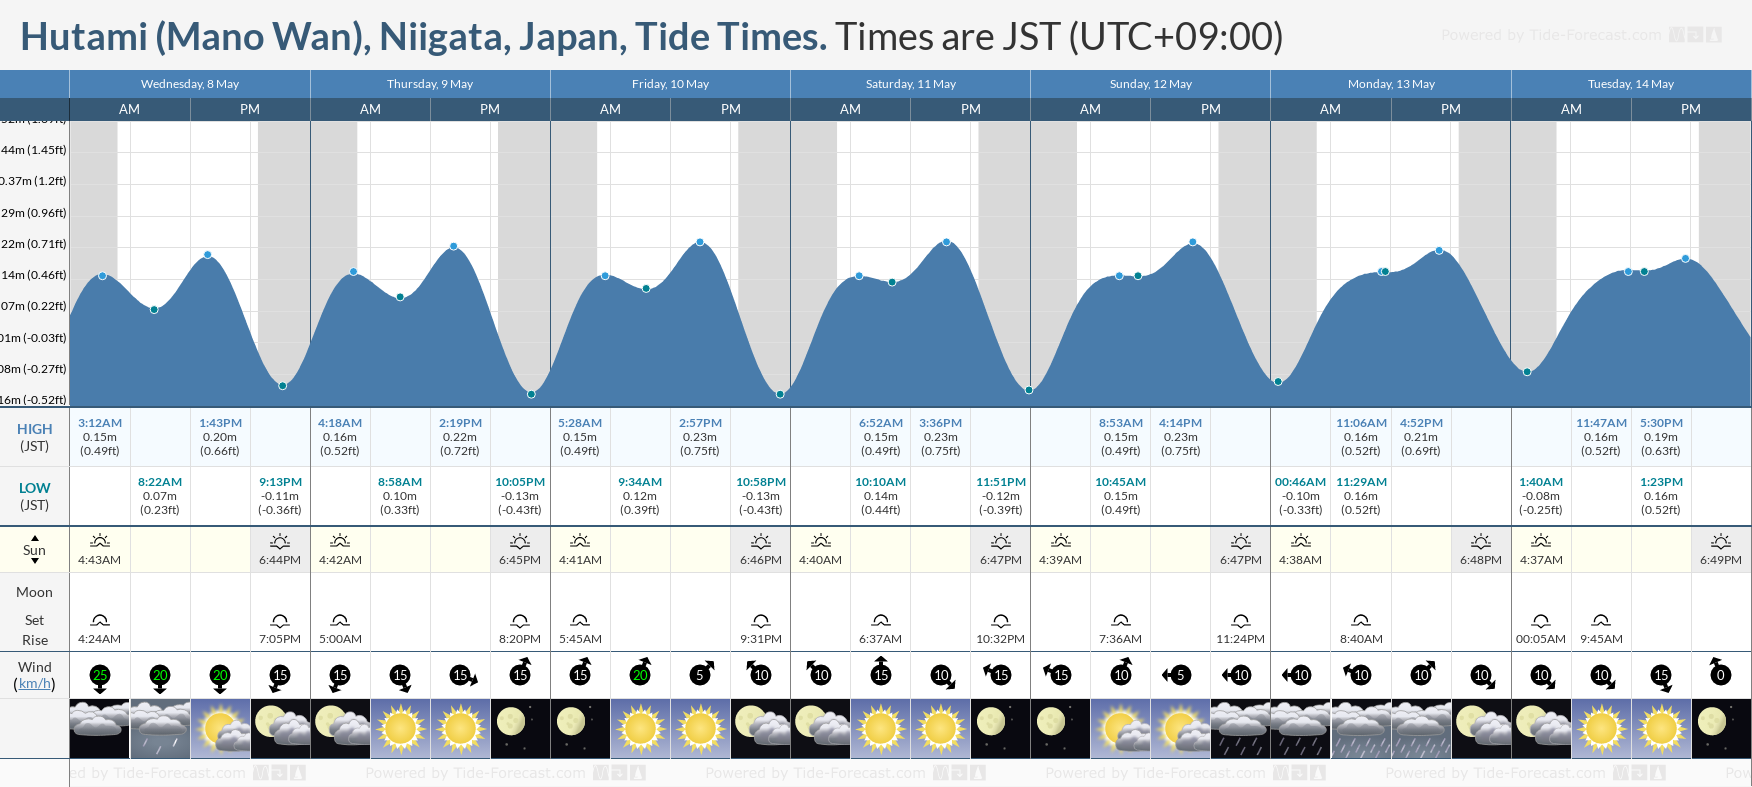 Hutami (Mano Wan), Niigata, Japan Tide Chart including high and low tide tide times for the next 7 days